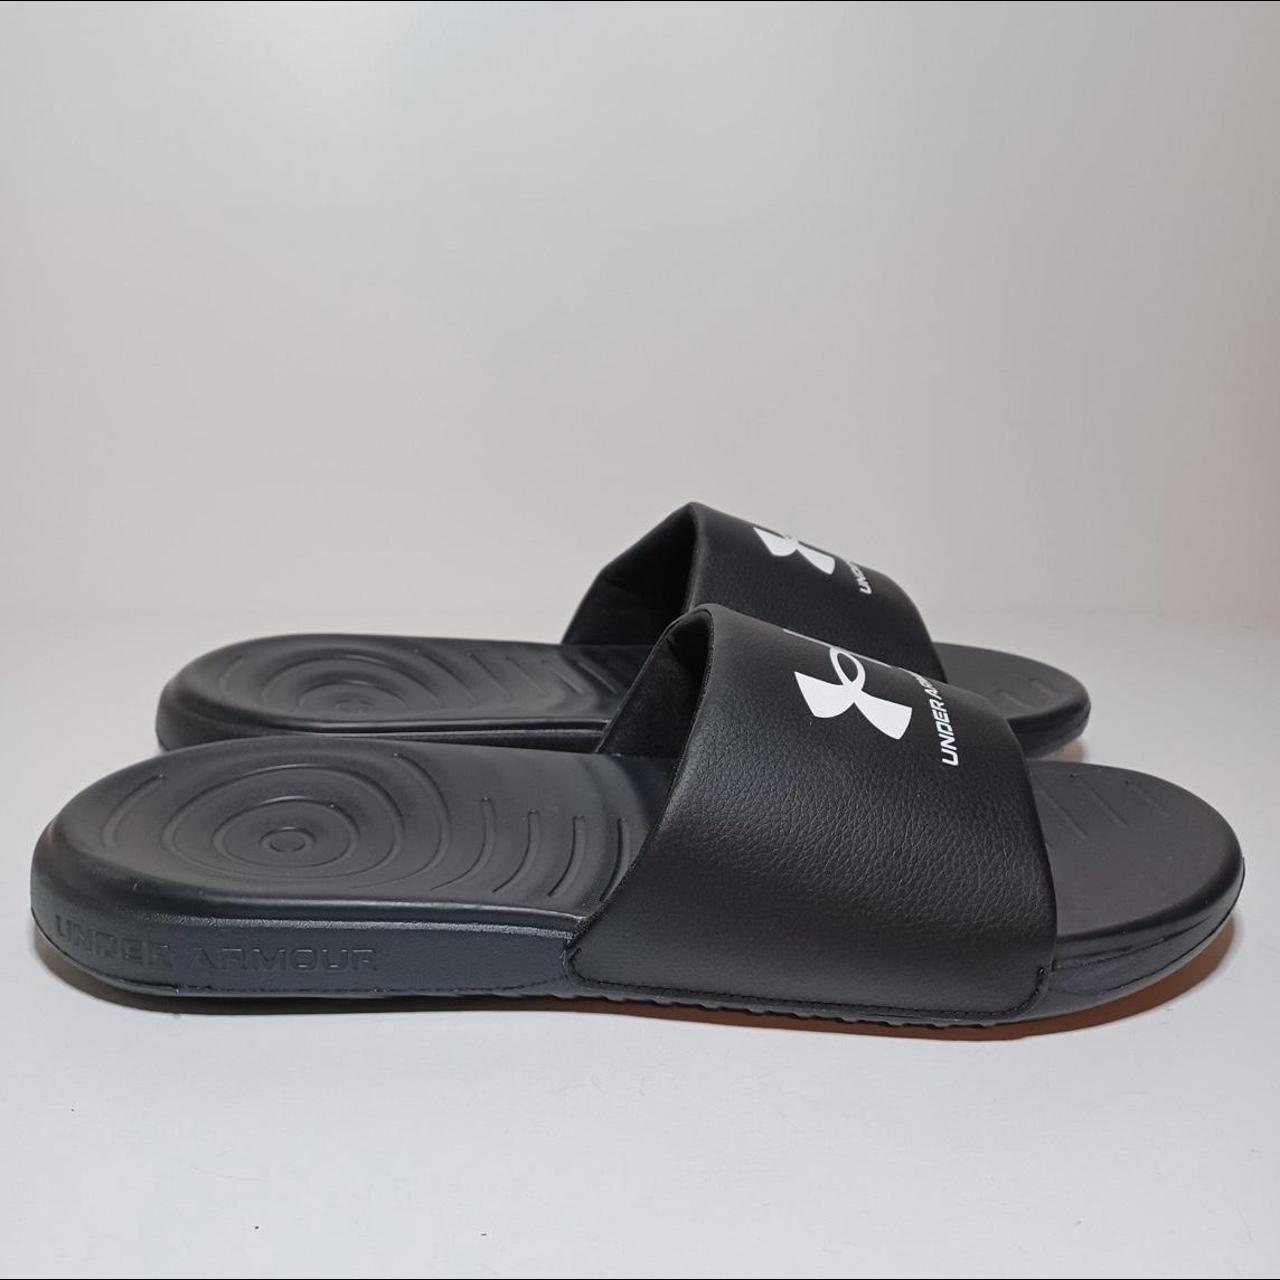 Under Armour USA Sandals for Men